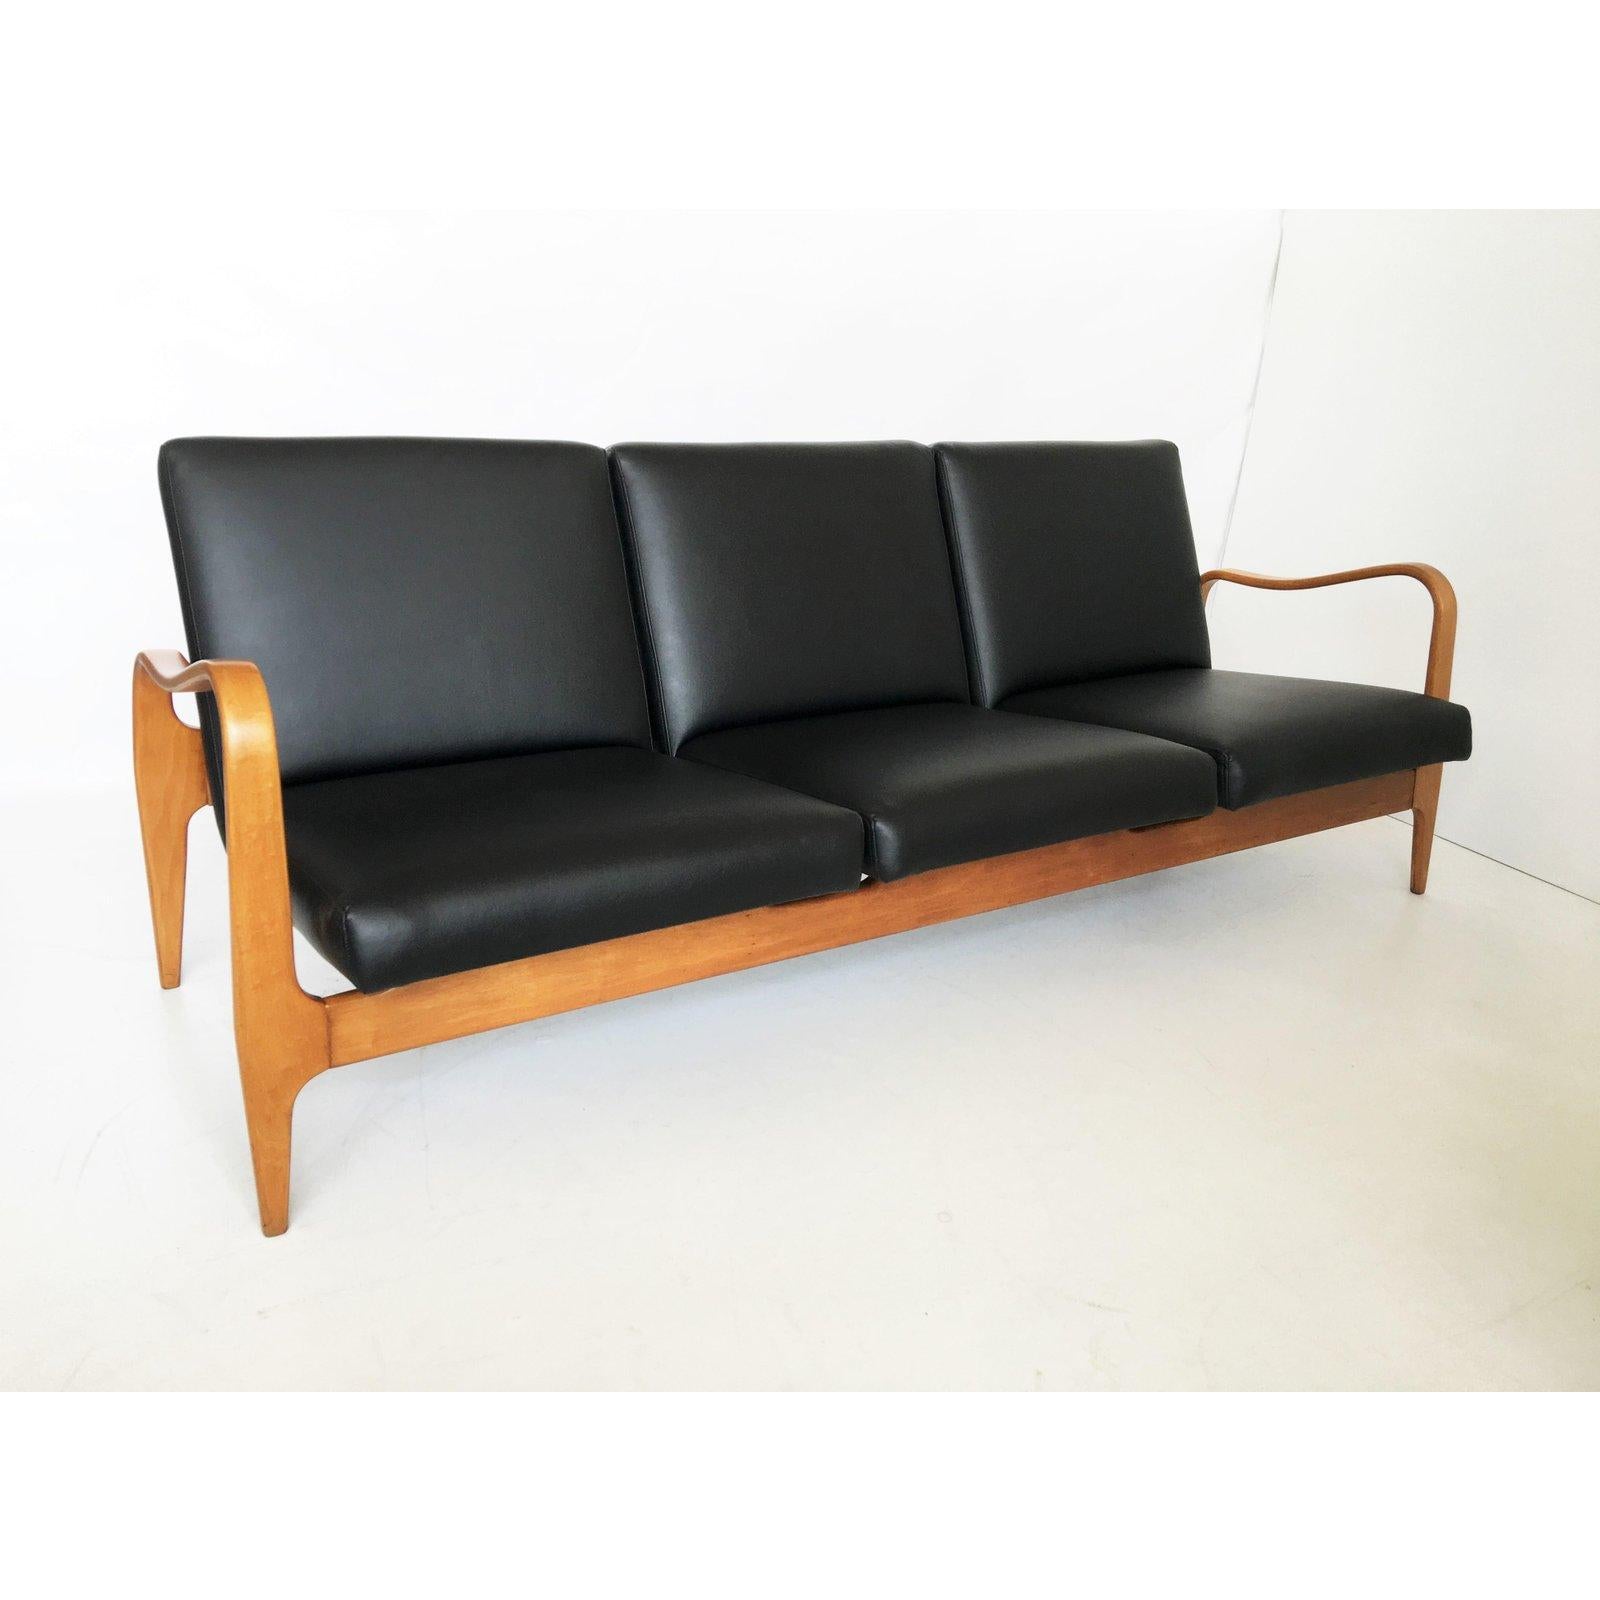 Unknown Modernist Thonet Sculpted Bentwood Sofa For Sale